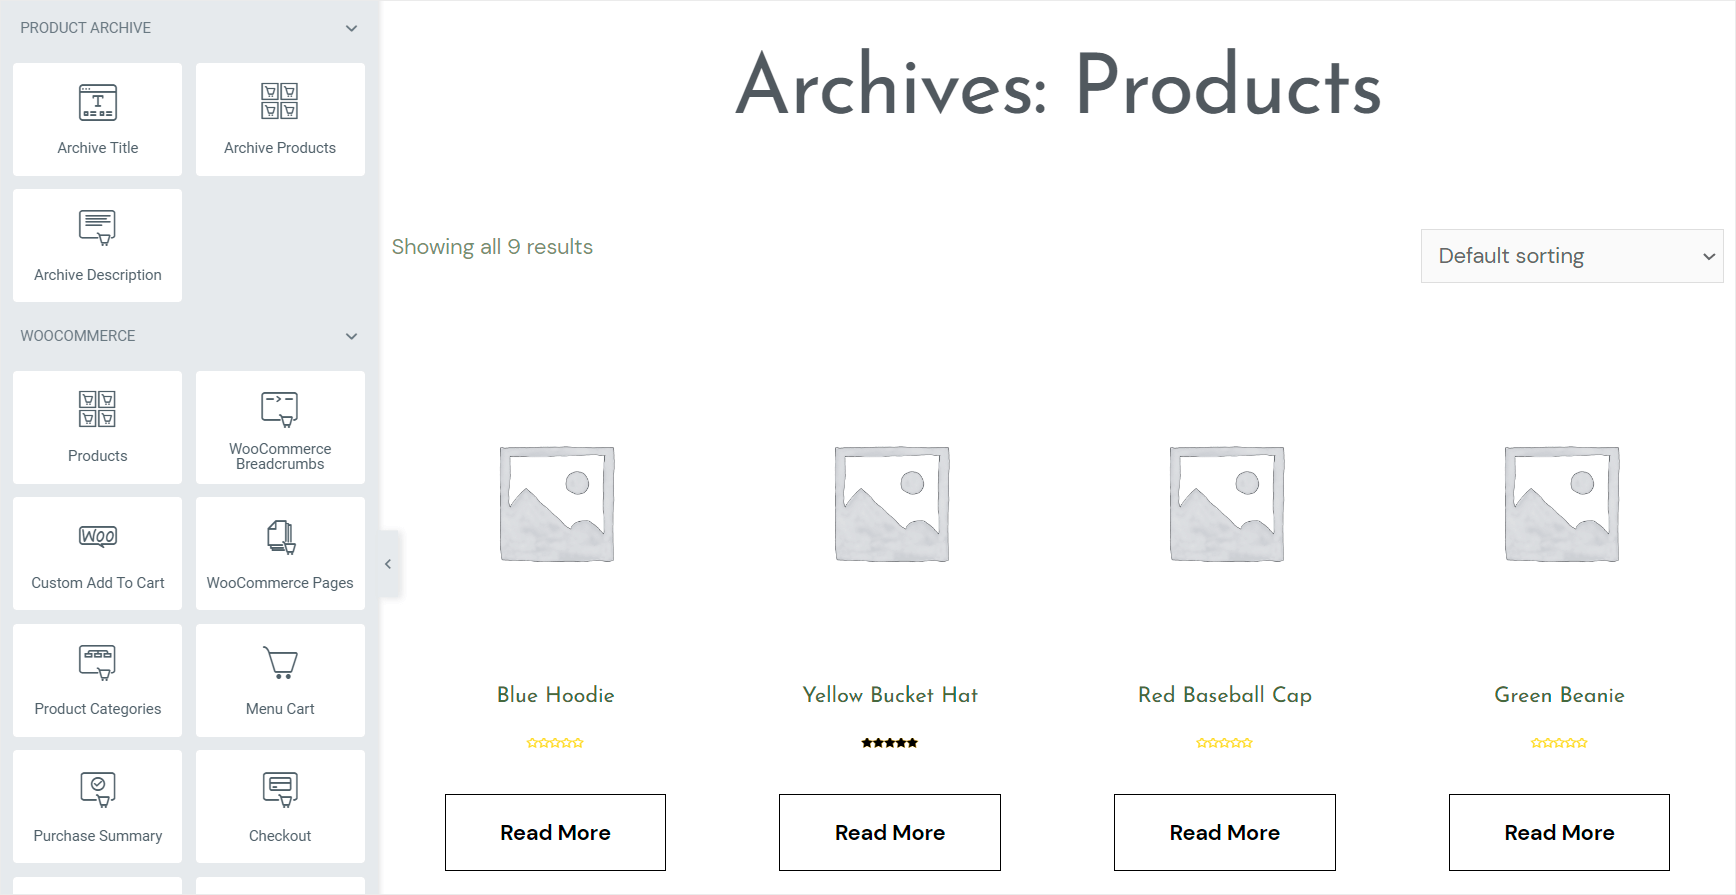 the Product Archive page